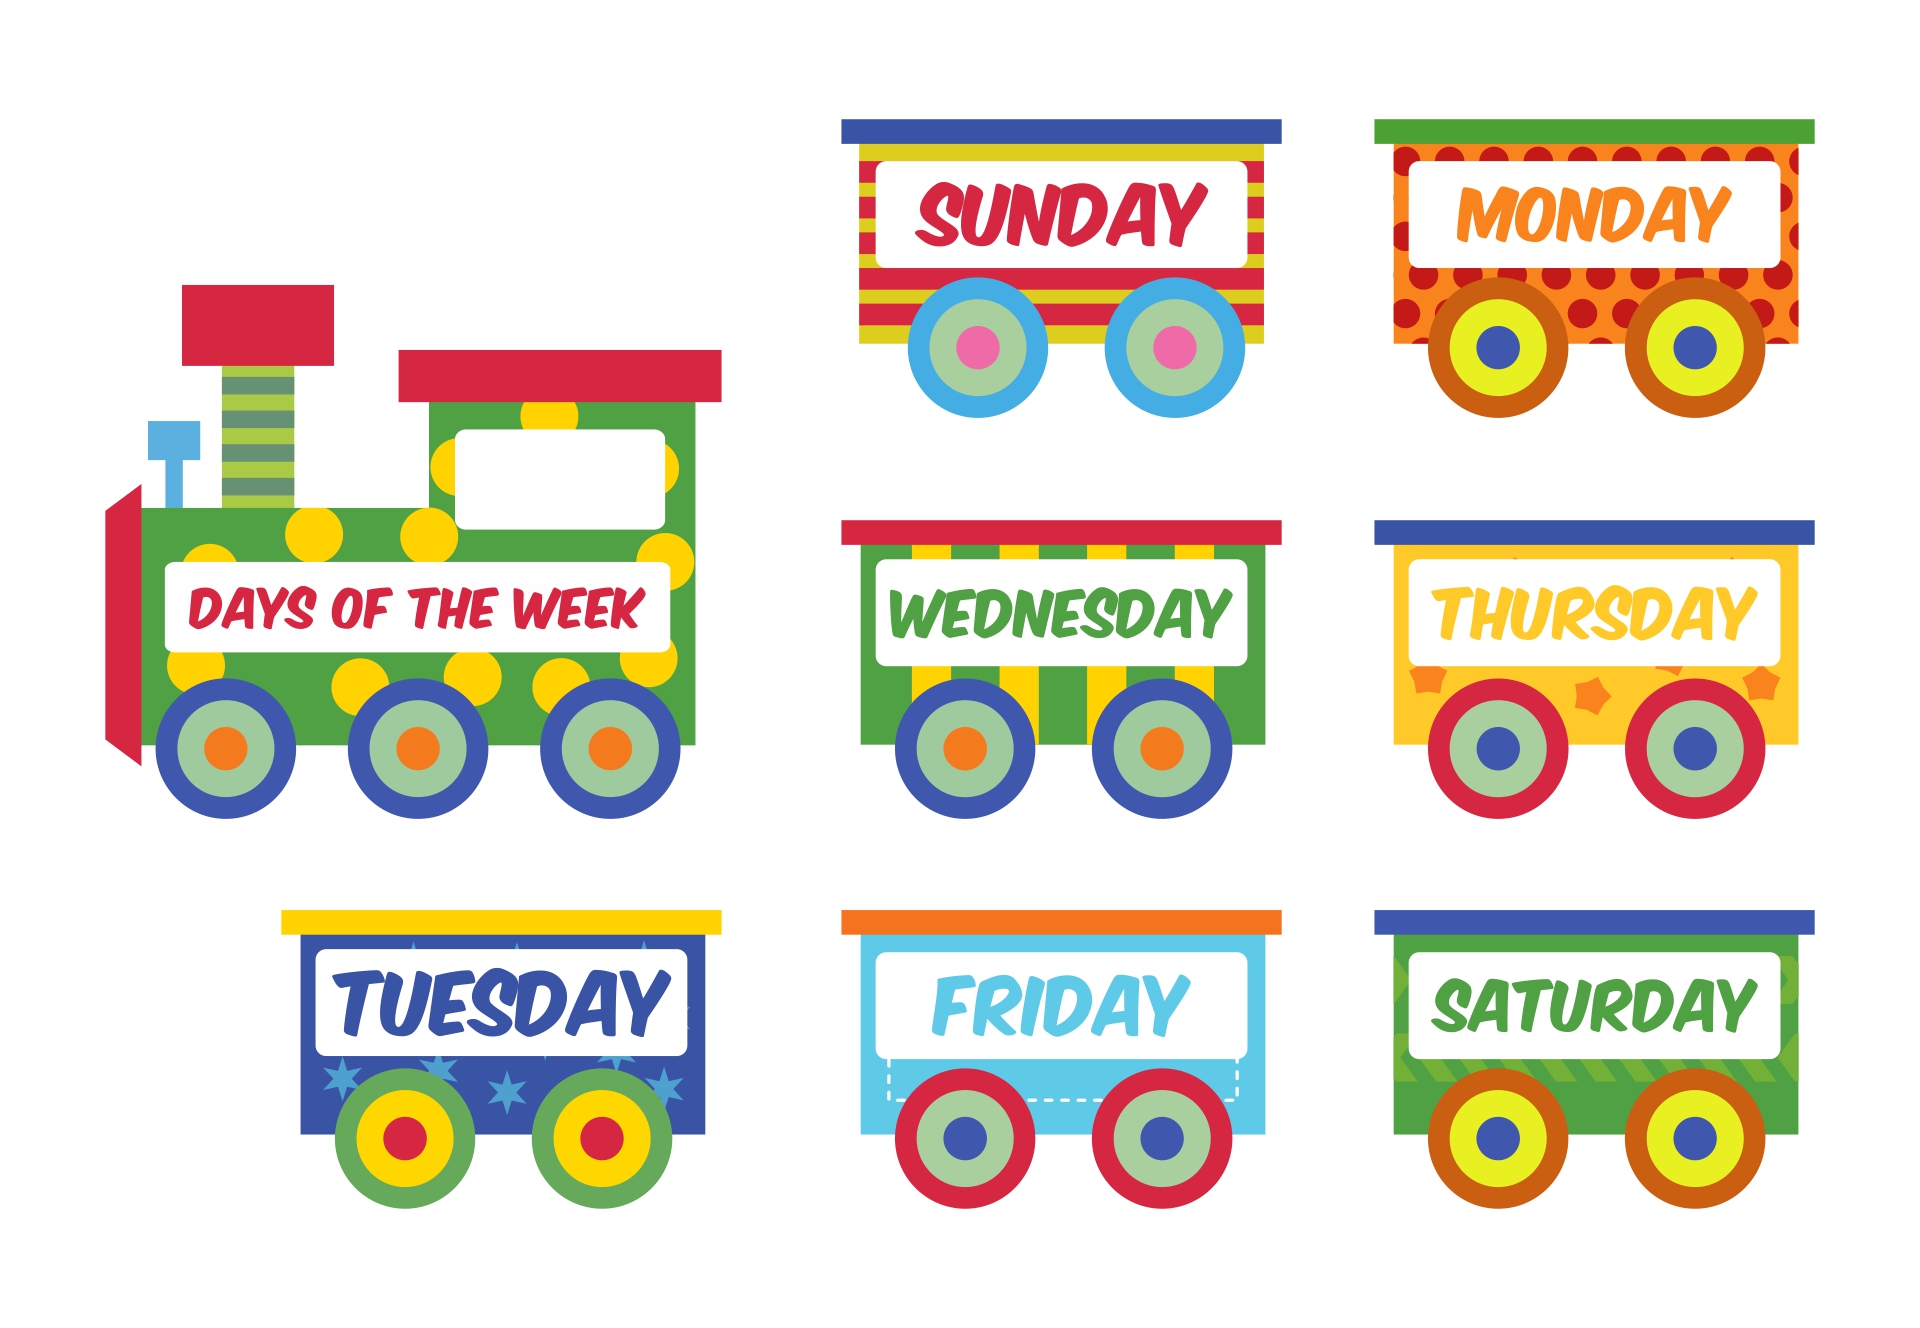 Days of the Week Train Printable